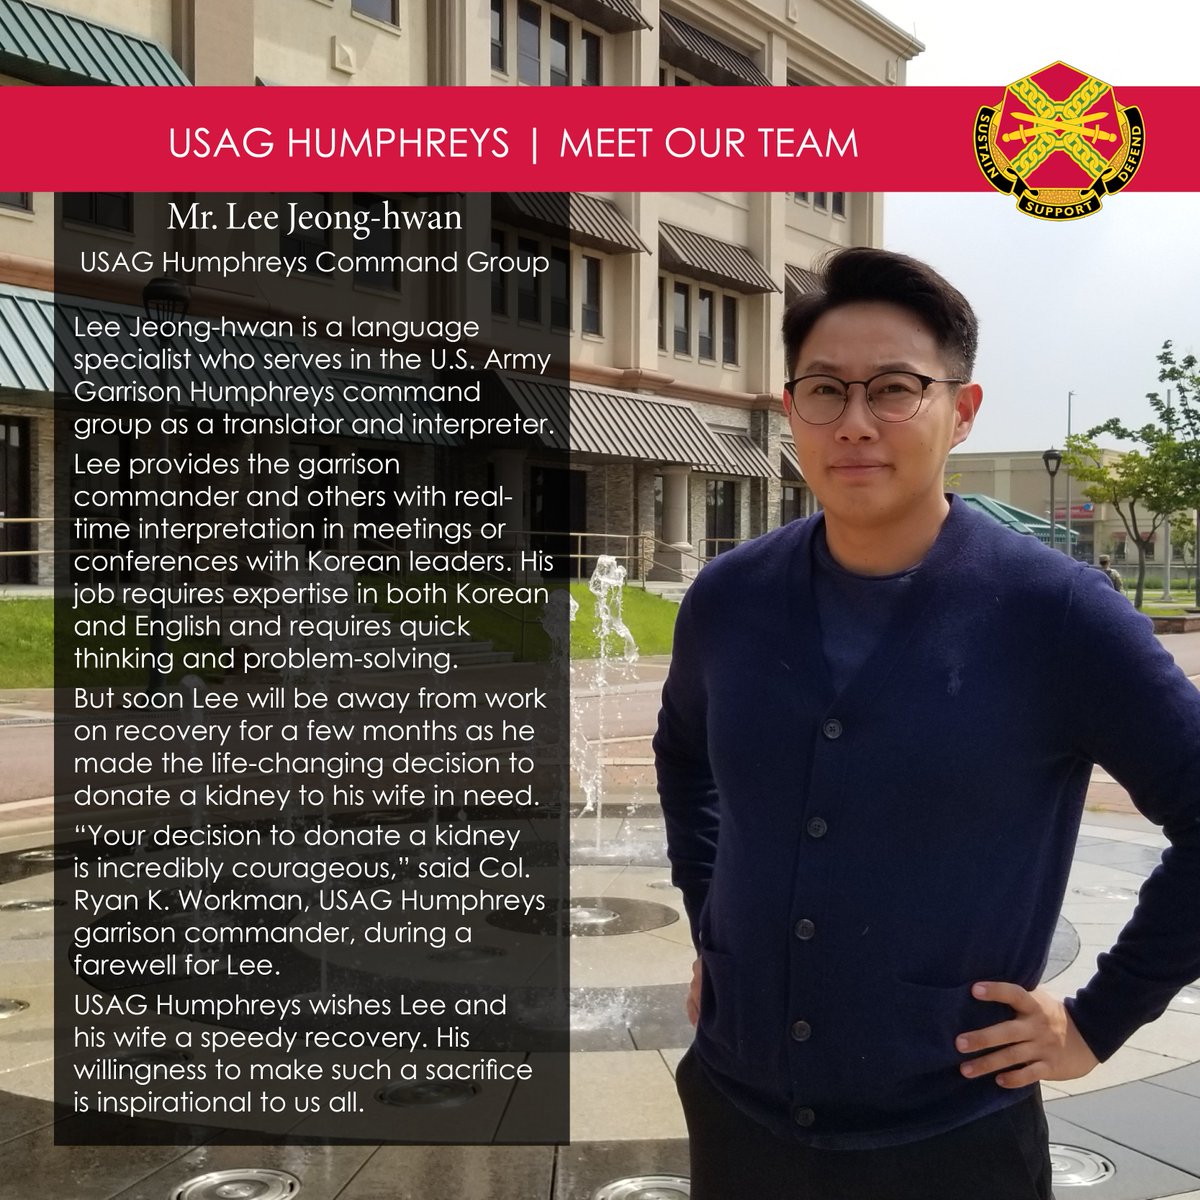 #MeetOurTeam Lee Jeong-hwan is a language specialist who serves in the #USAGHumphreys command group as a translator and interpreter. Soon Lee will be away from work on recovery for a few months as he made the life-changing decision to donate a kidney to his wife in need.